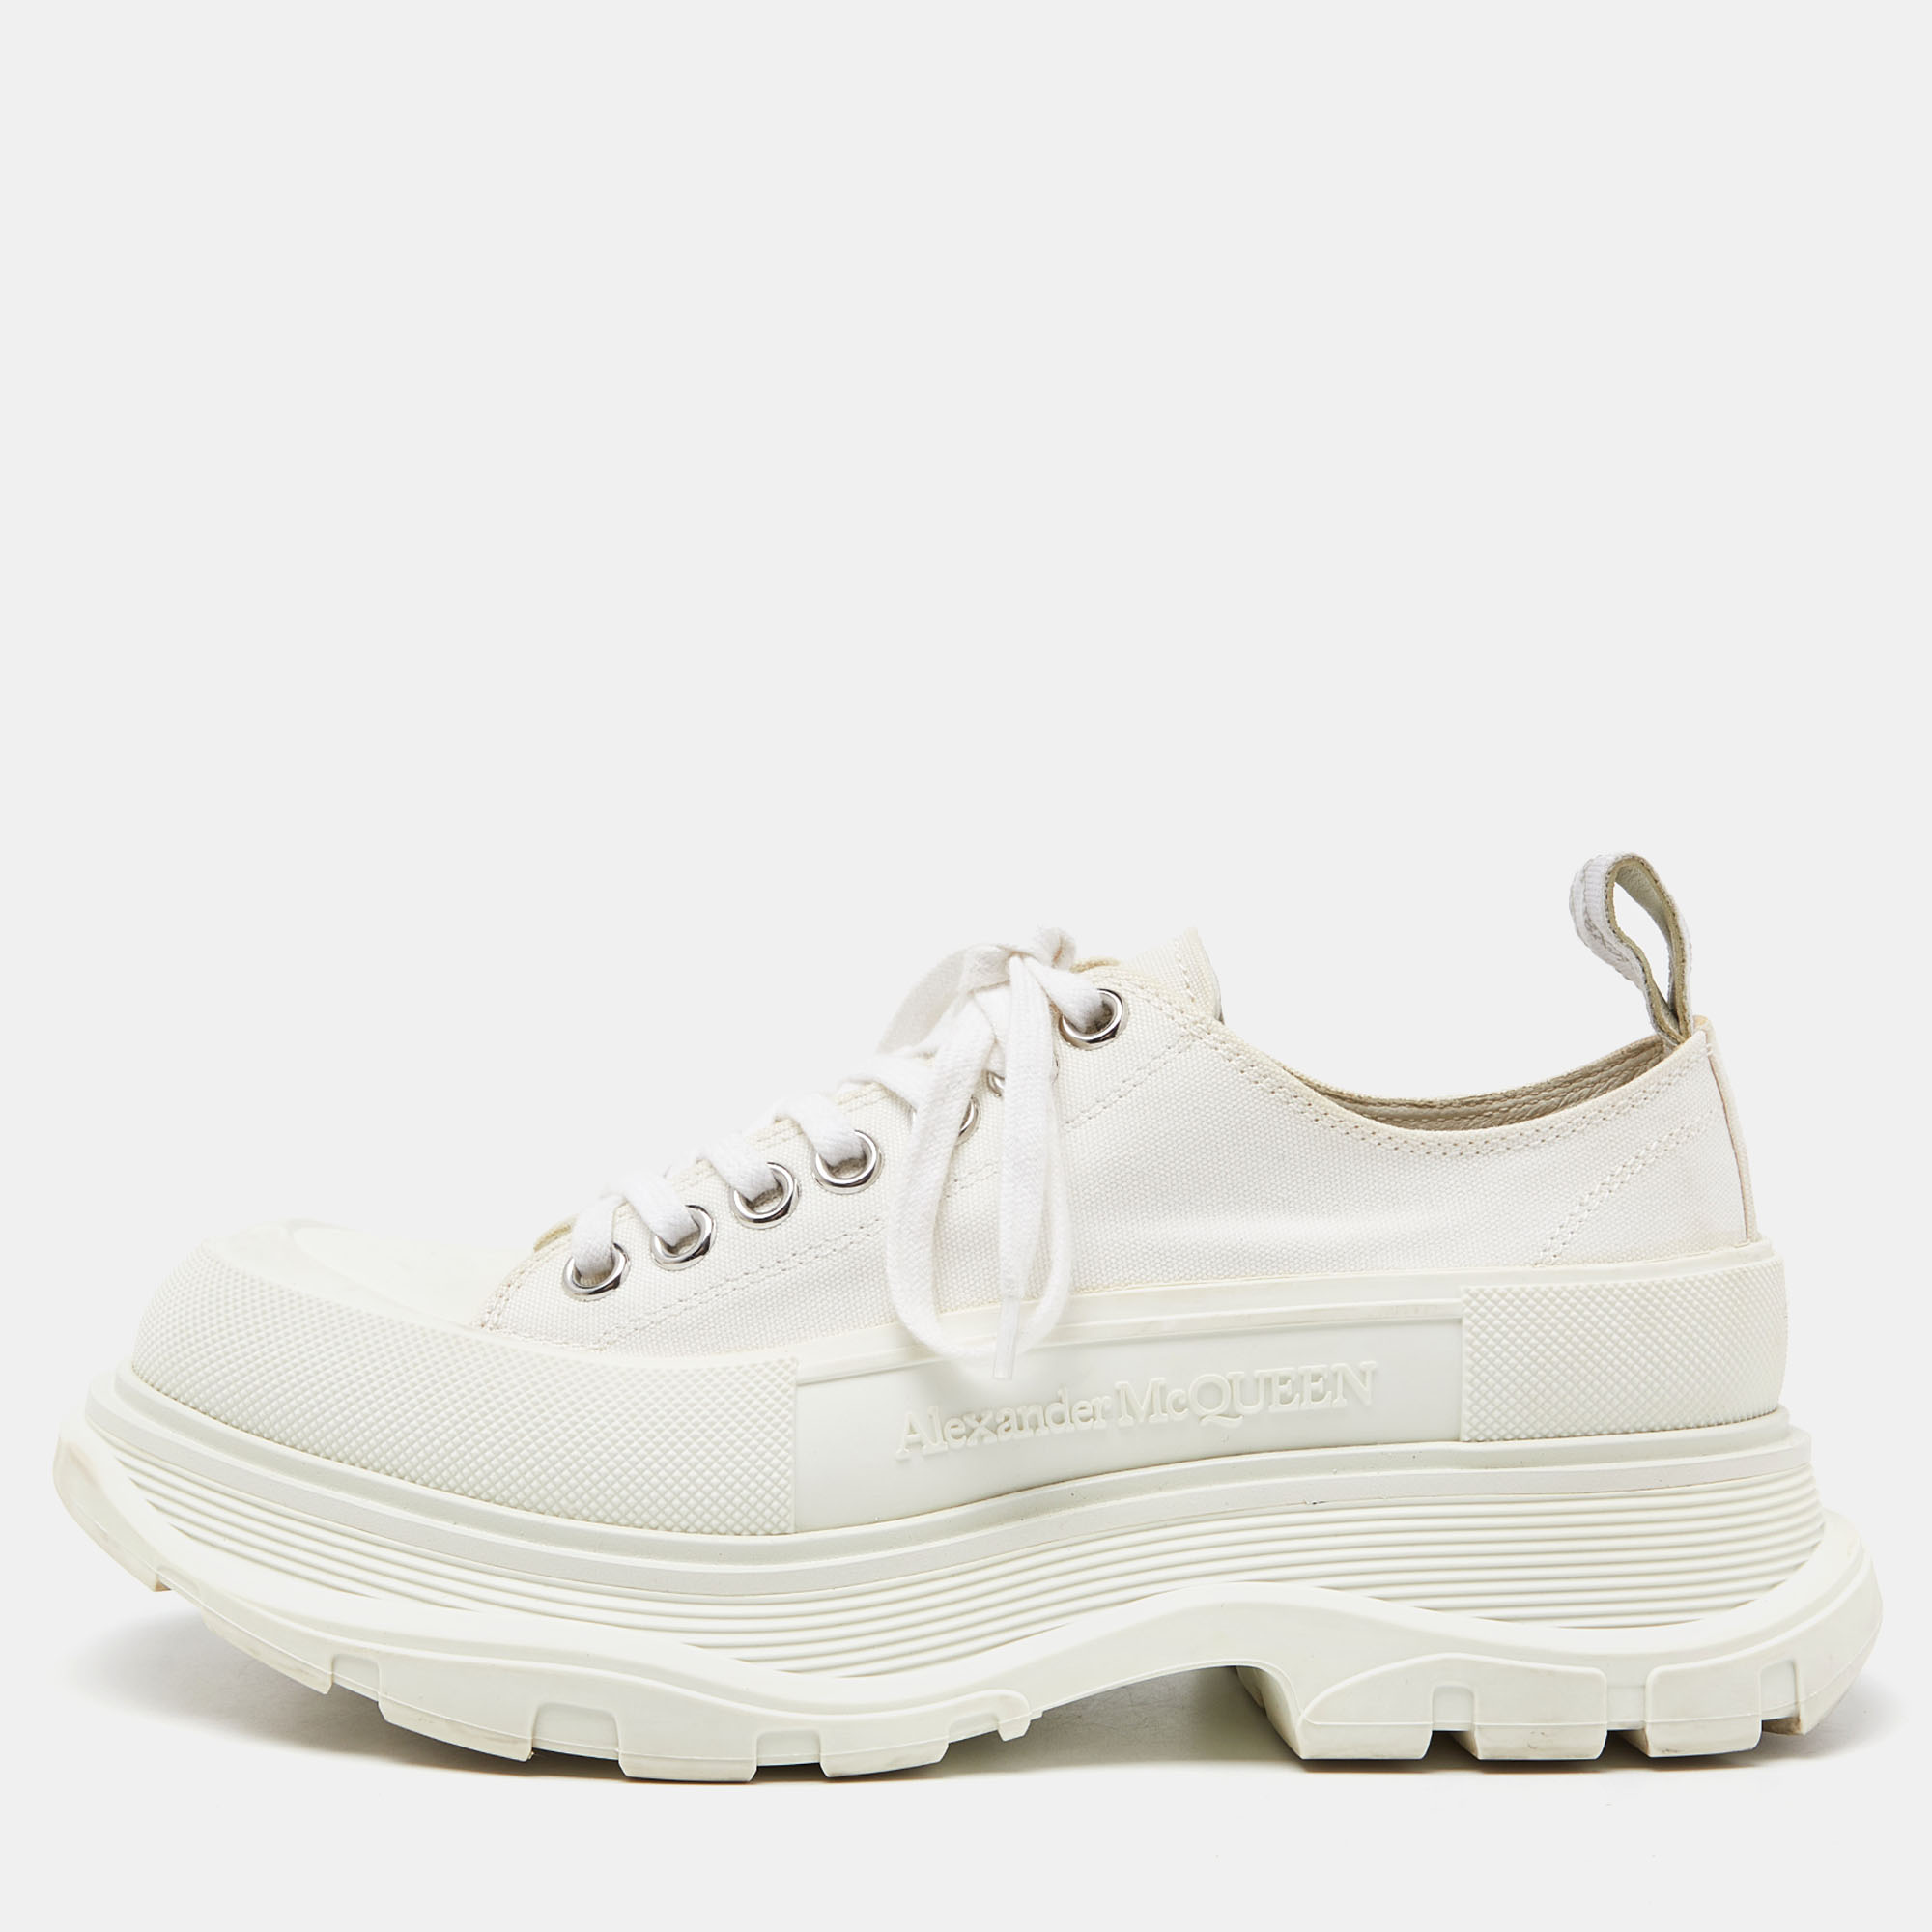 Alexander mcqueen white canvas and rubber tread slick lace up sneakers 39